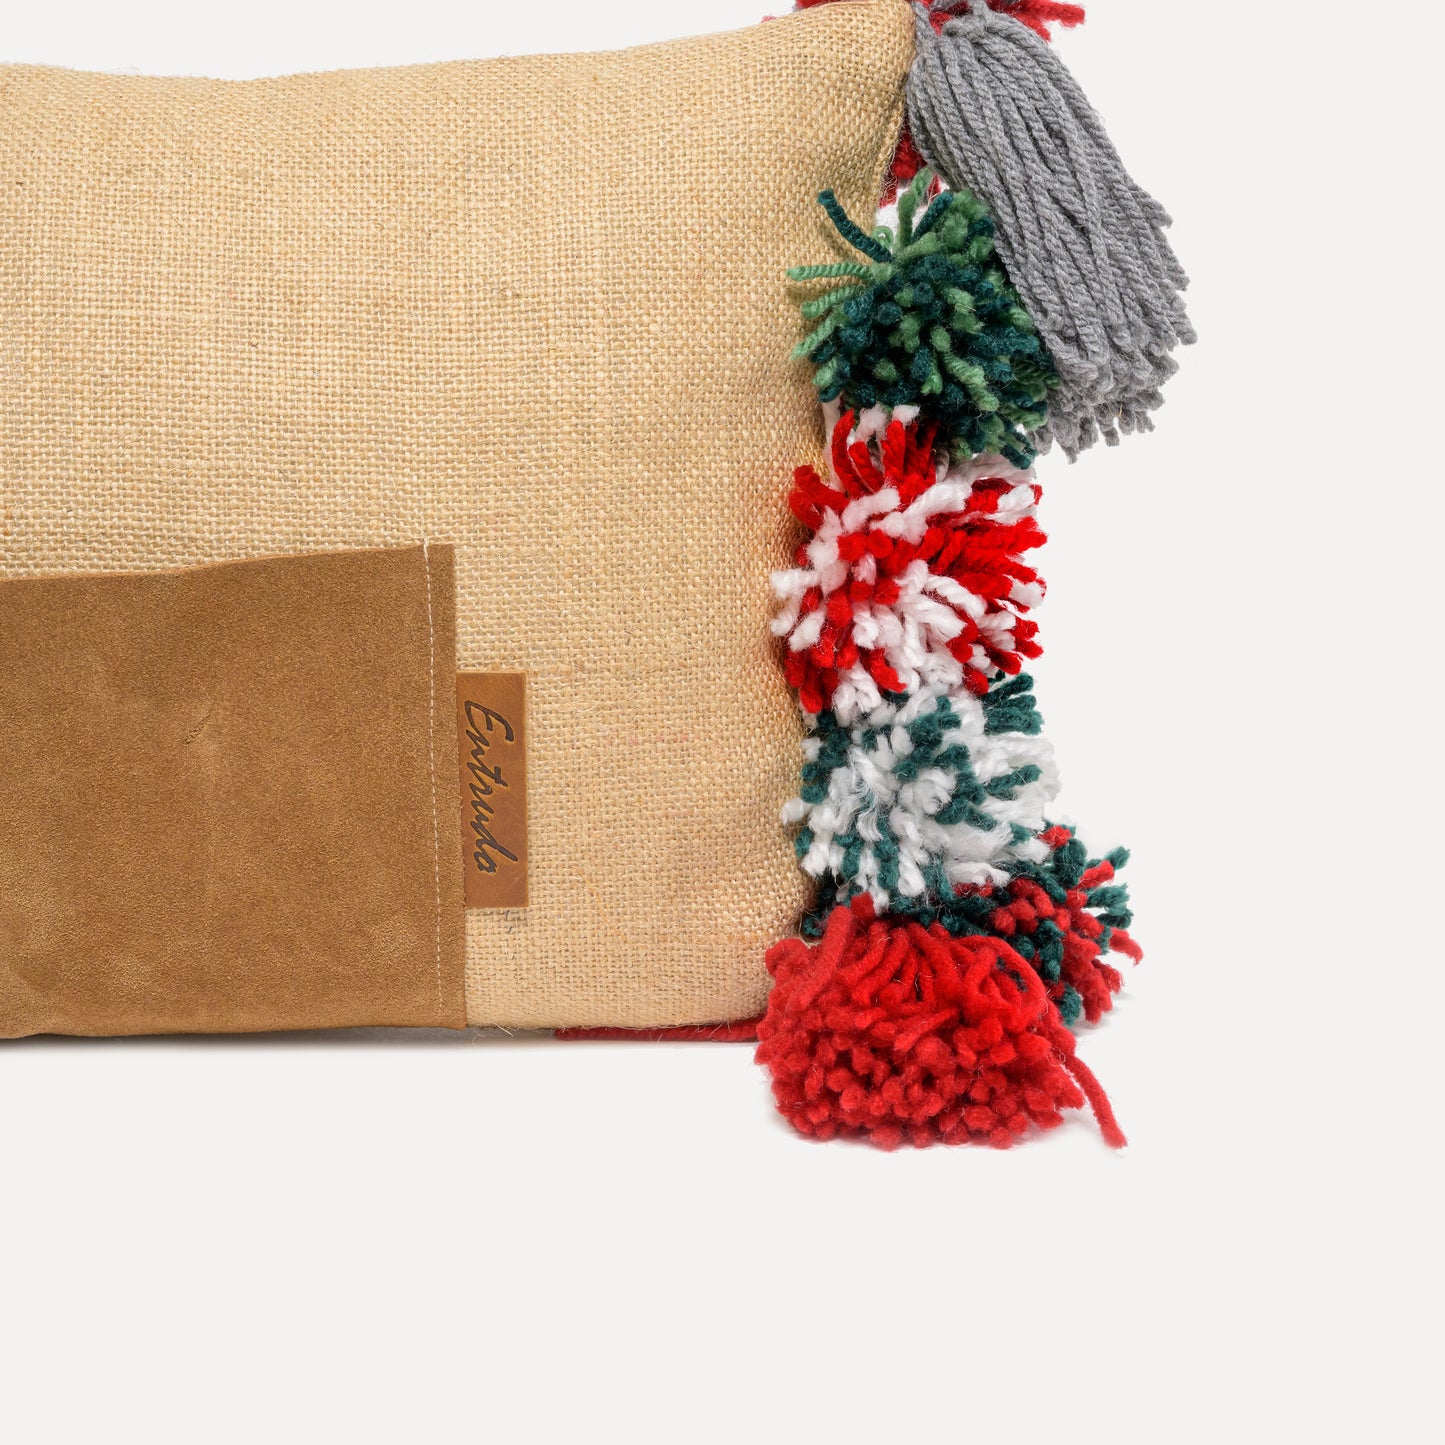 Onor (Special Christmas Edition) - cushion with wool pom poms and a leather pocket